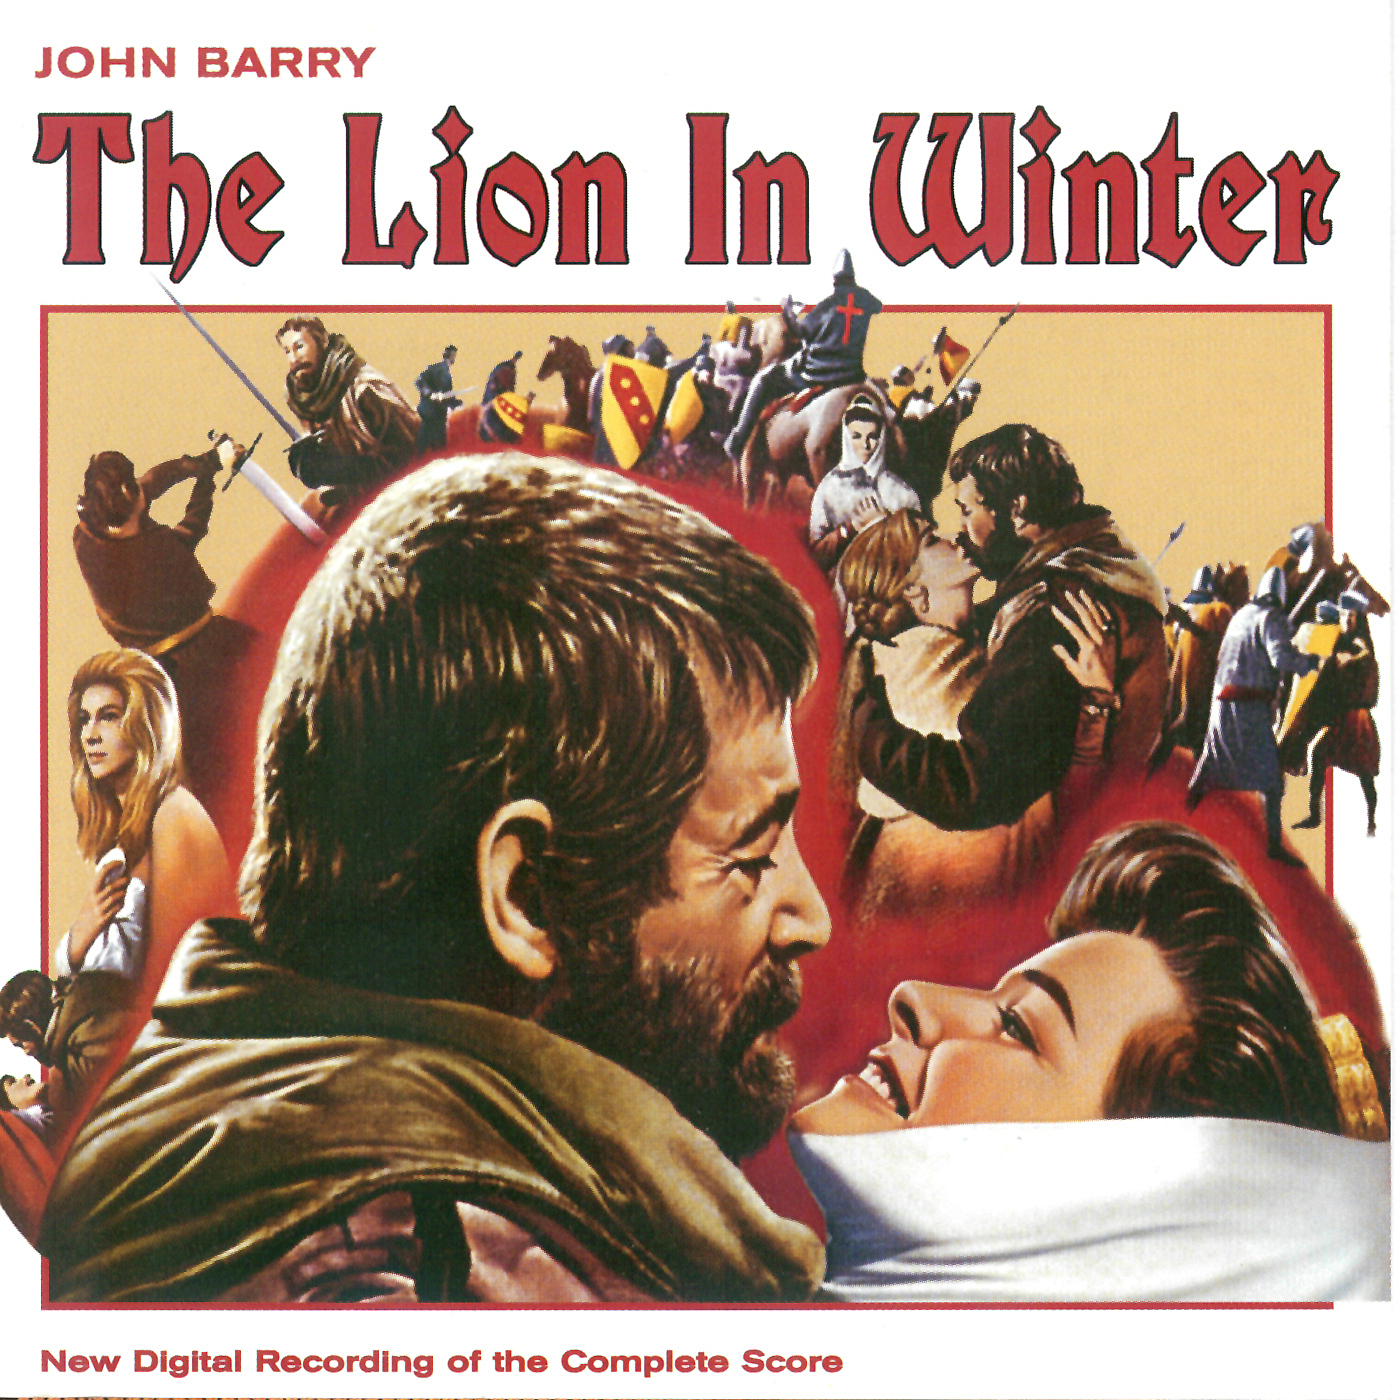 How Beautiful You Made Me (From "The Lion in Winter")